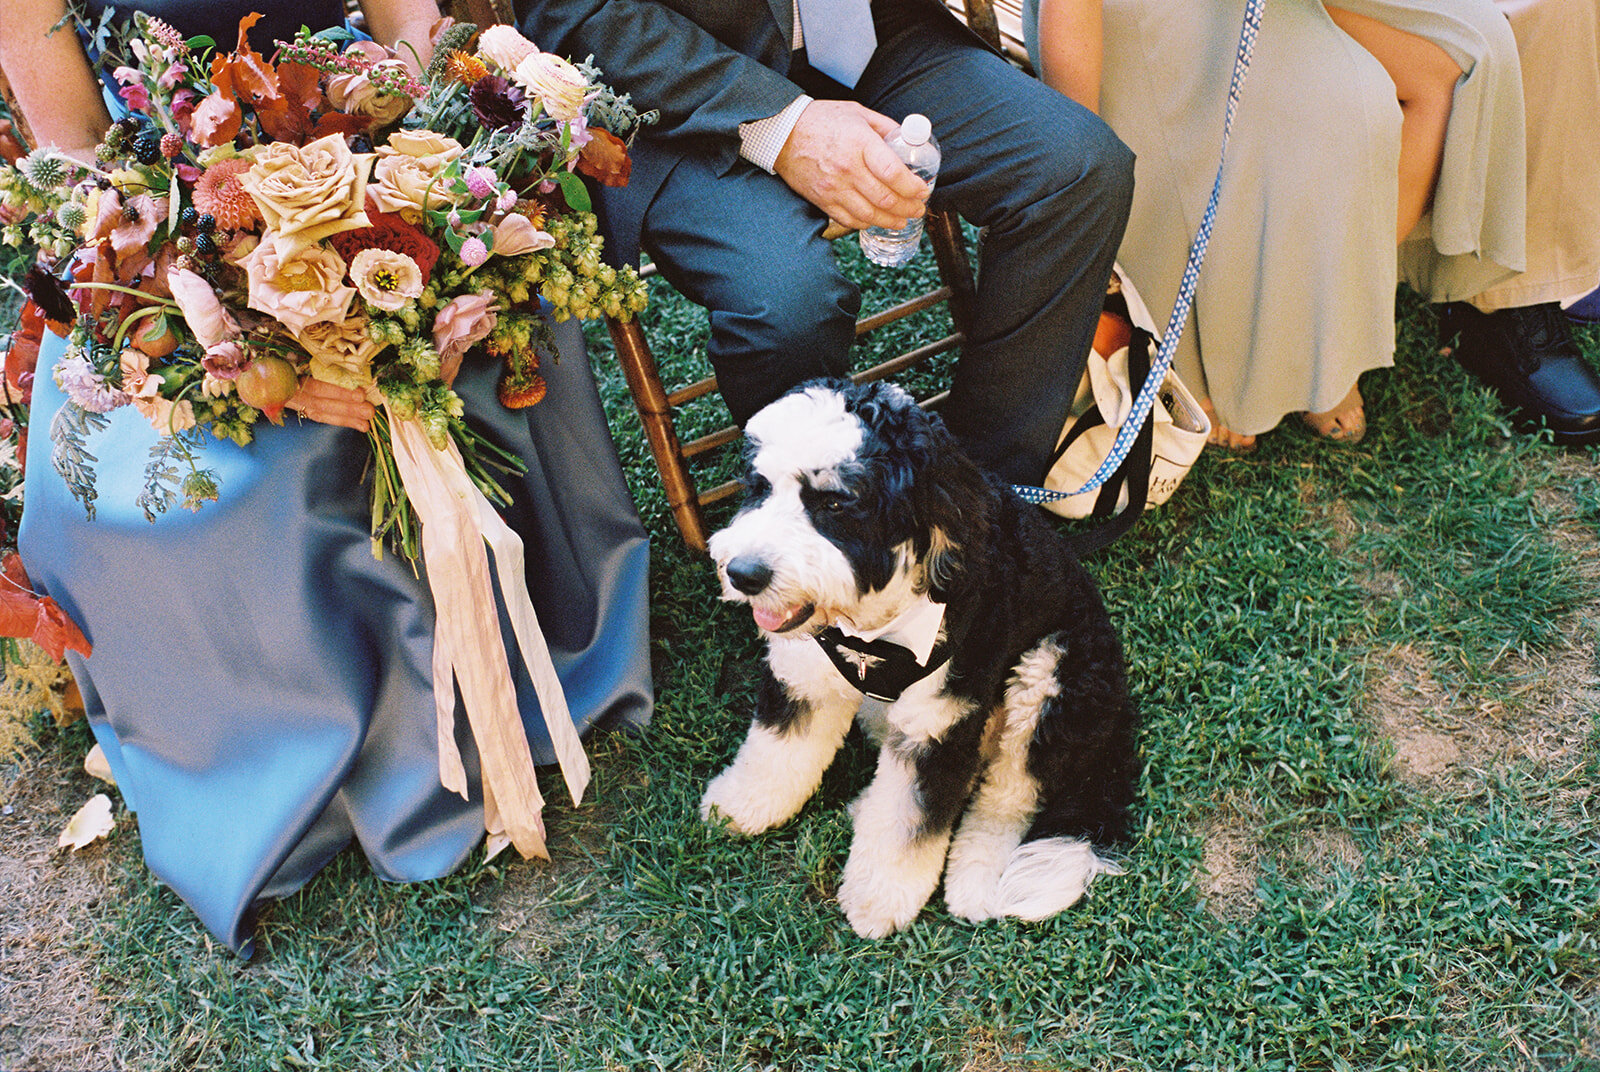 Late summer wildflower-inspired wedding floral design at RT Lodge. Bride's and groom's bernedoodle dog as the ring bearer and star of the show.